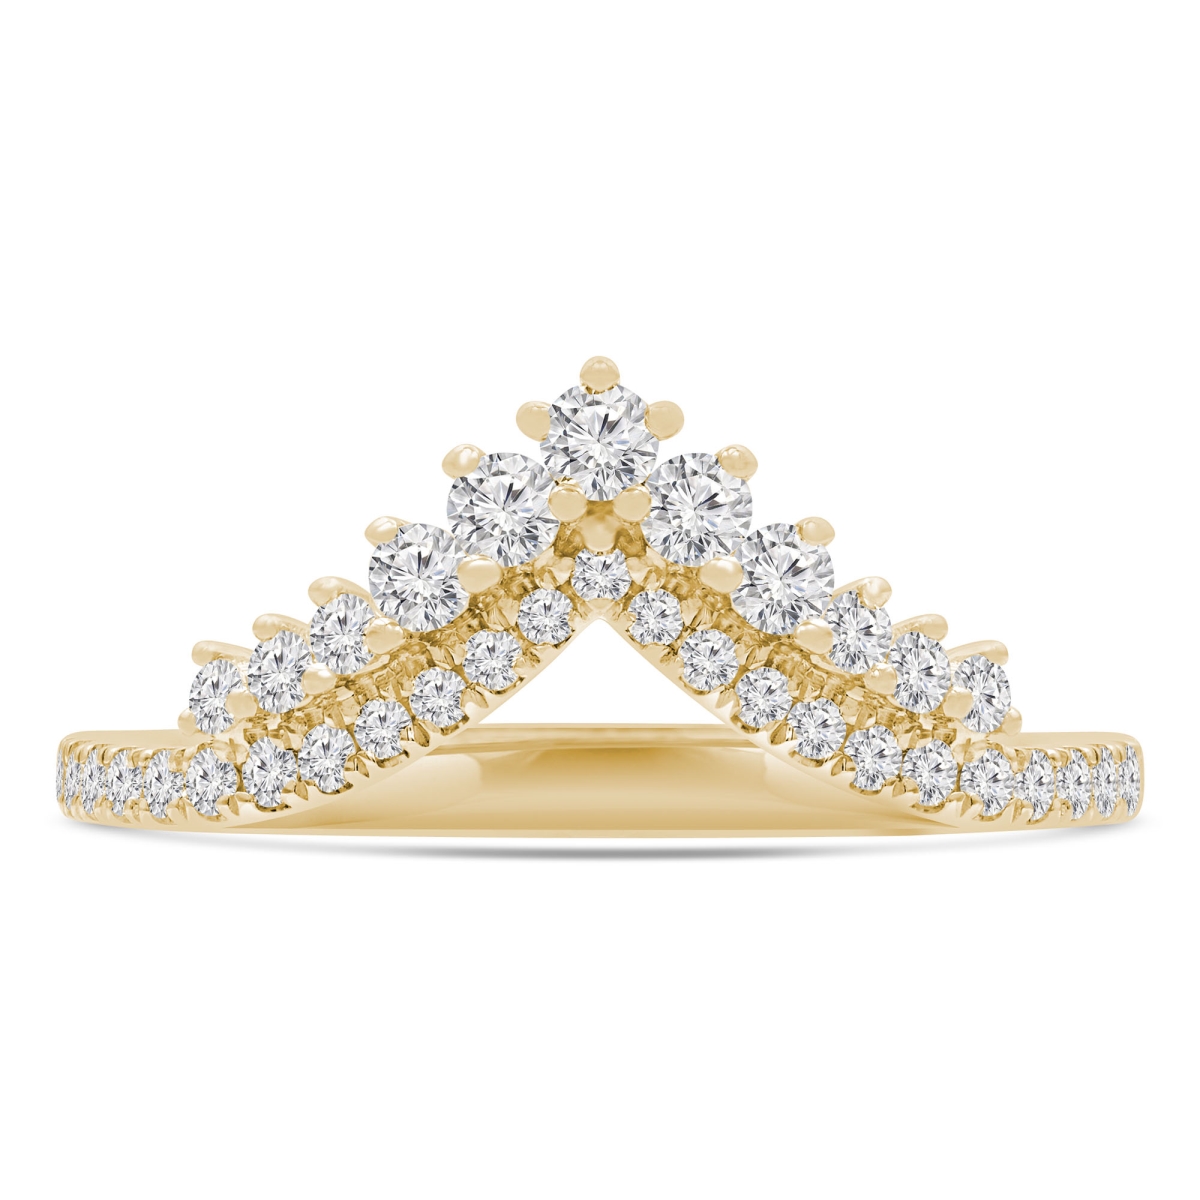 MDR220215-9 0.38 CTW Round Diamond Two-Row Tiara Shared Prong Semi-Eternity Anniversary Wedding Band Ring in 14K Yellow Gold - Size 9 -  Majesty Diamonds